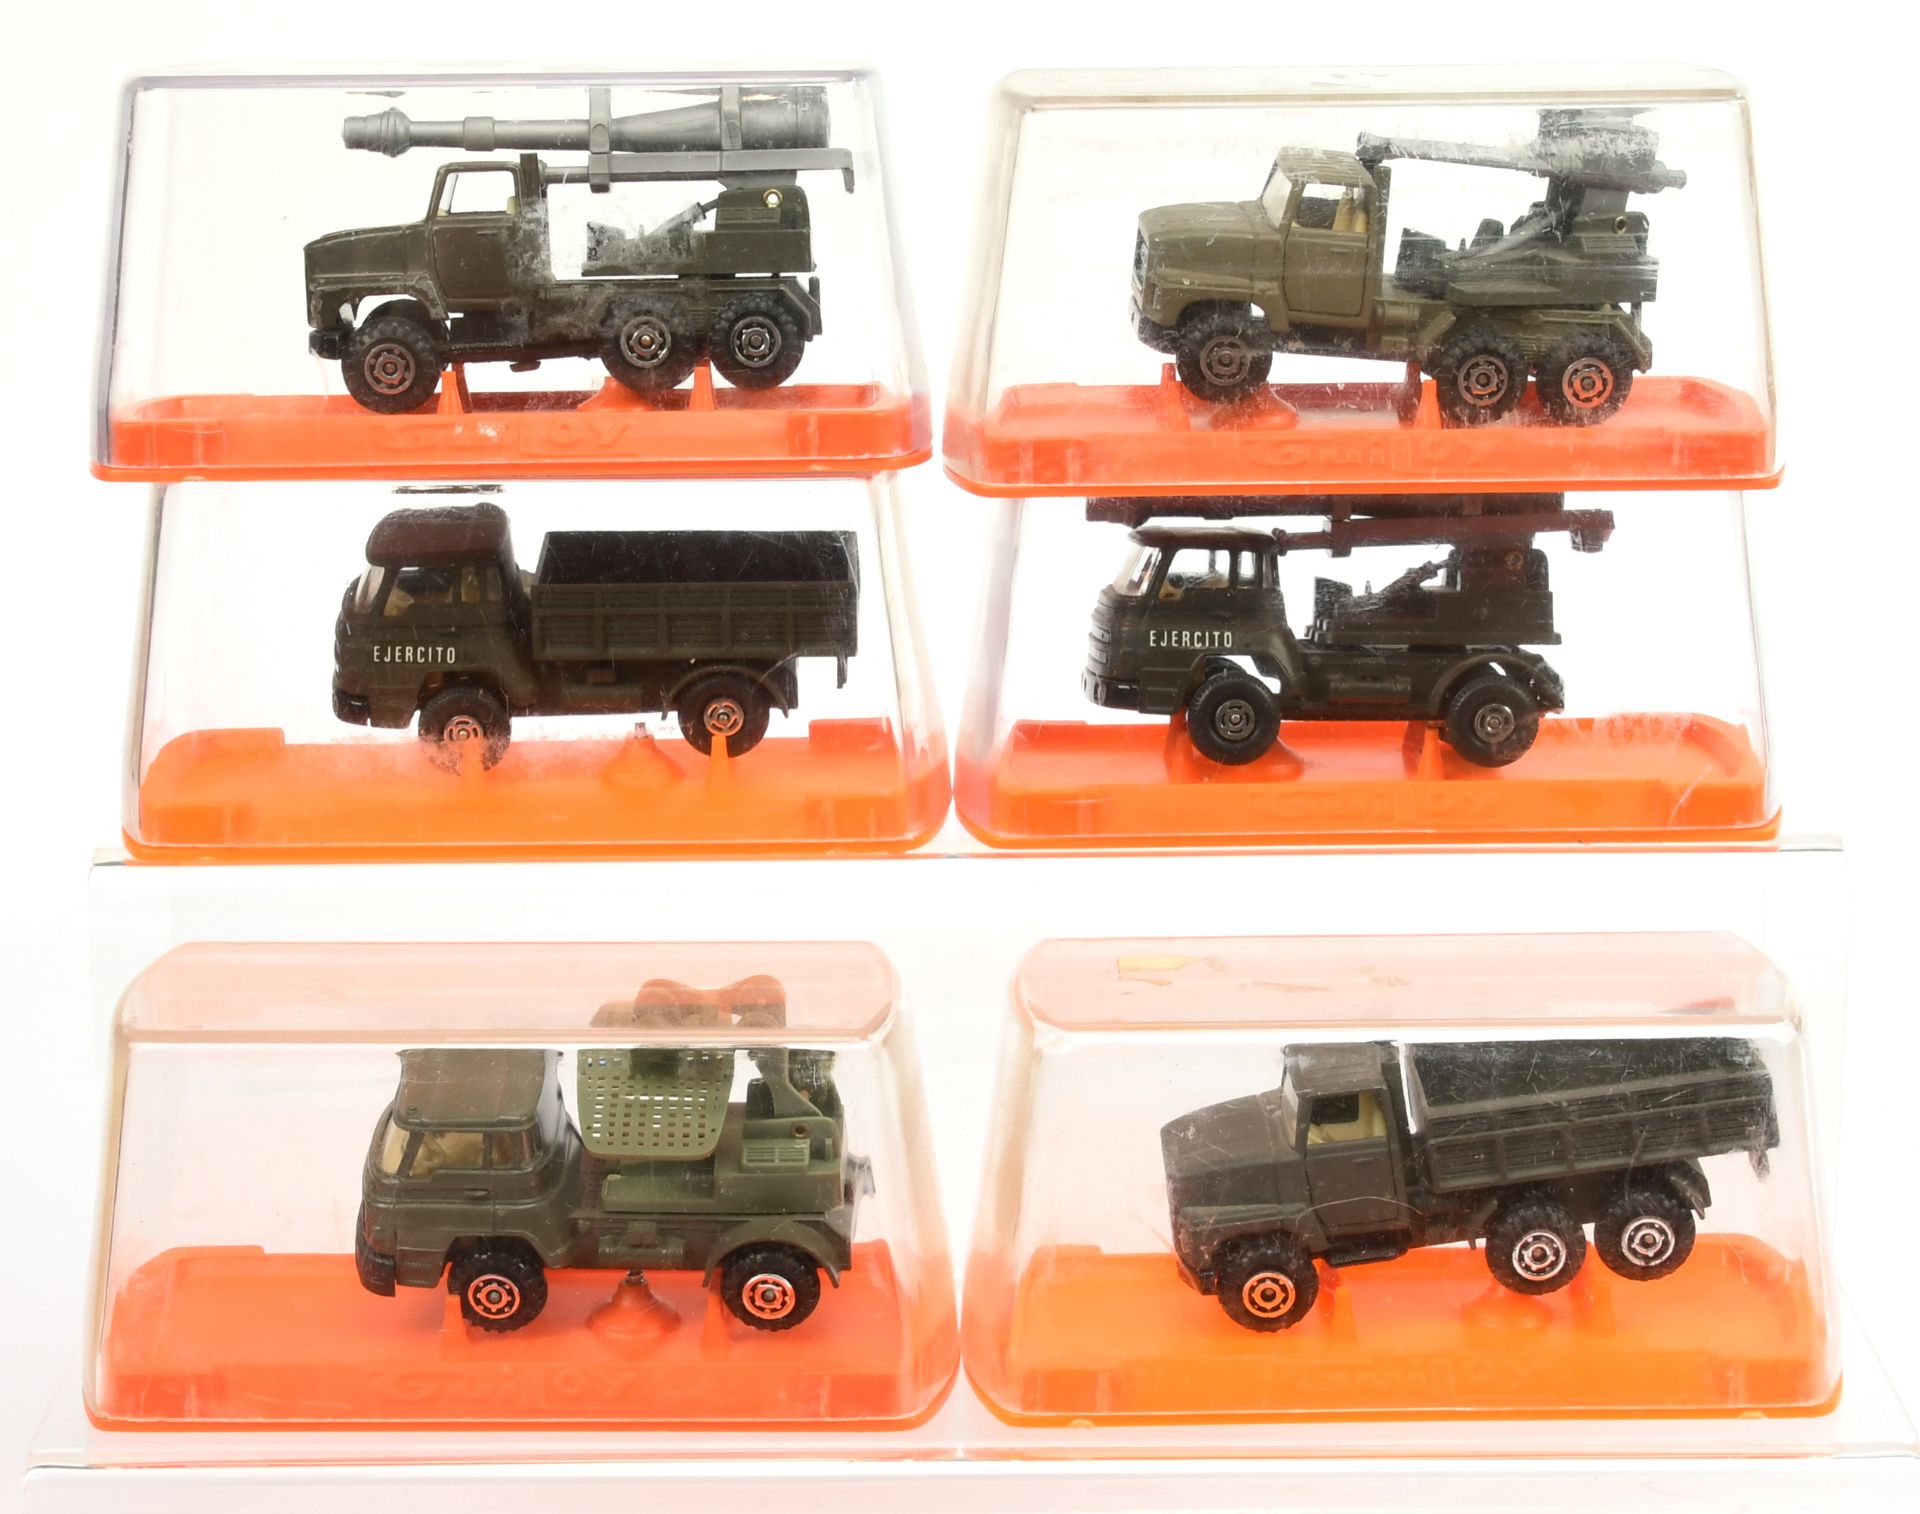 Guiloy Military group of 6 to include - open back truck, Rocket launcher